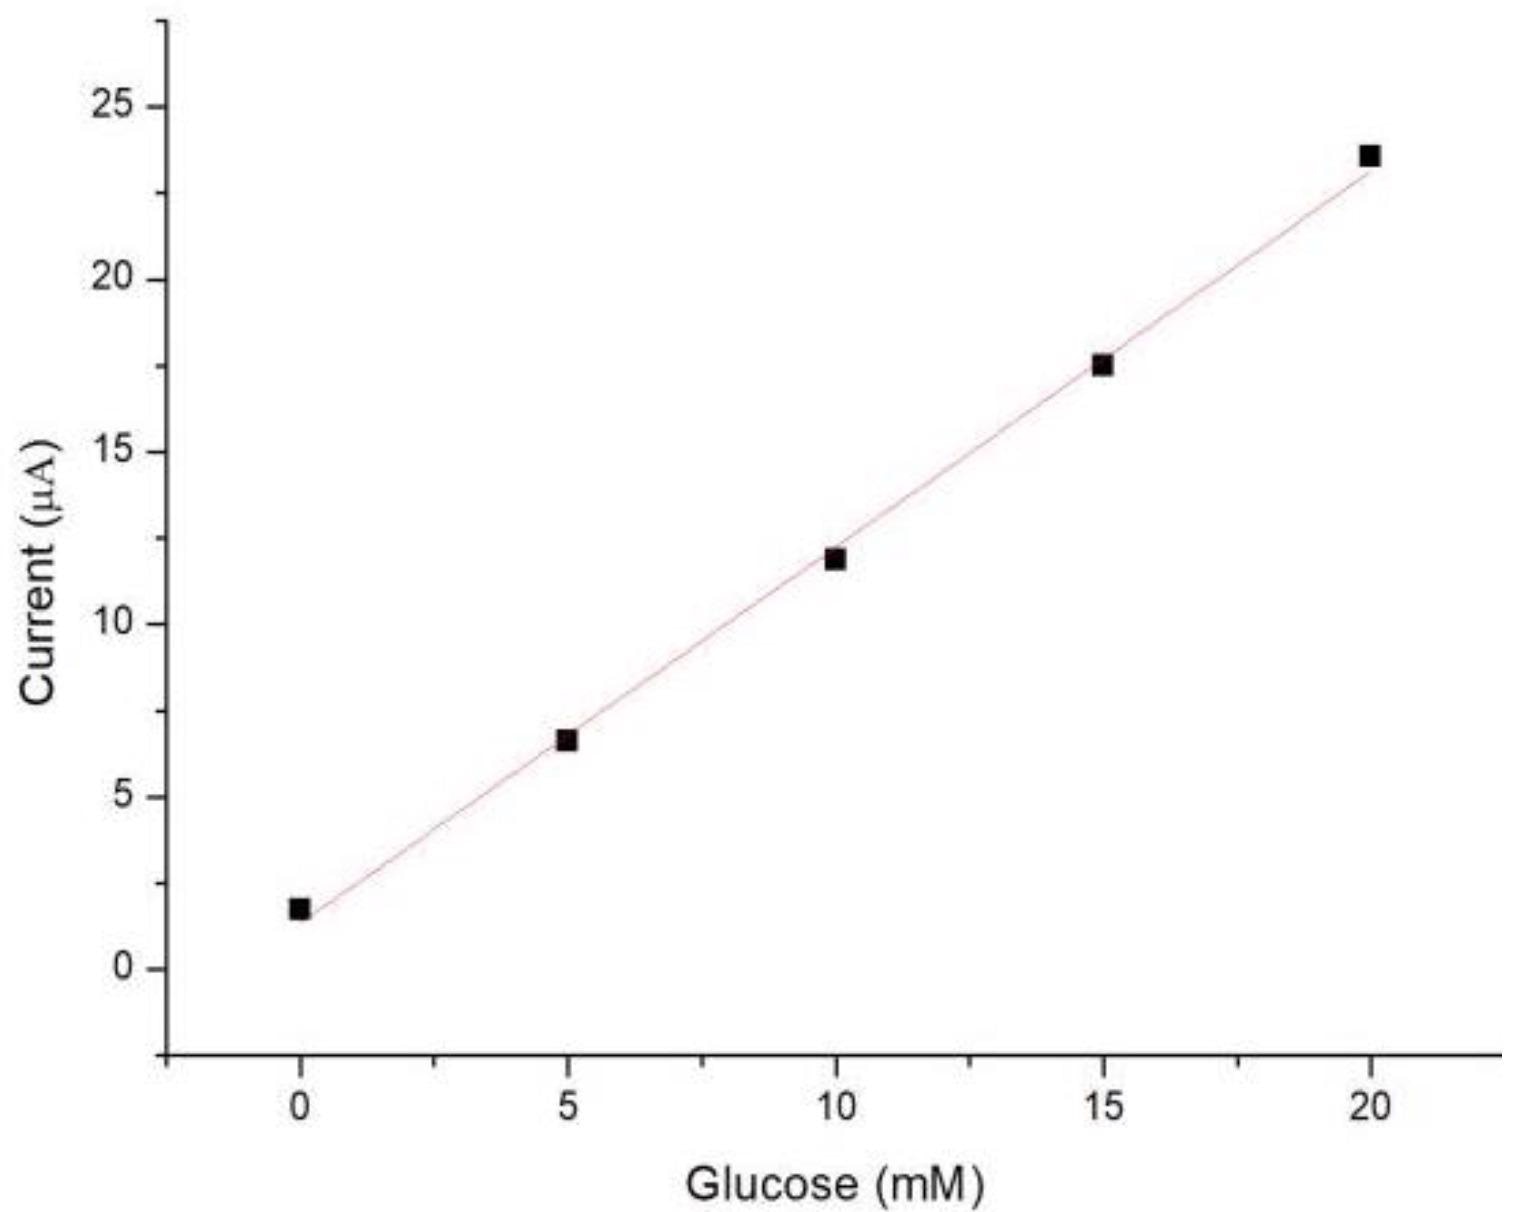 The calibration plot for the measurement of glucose.